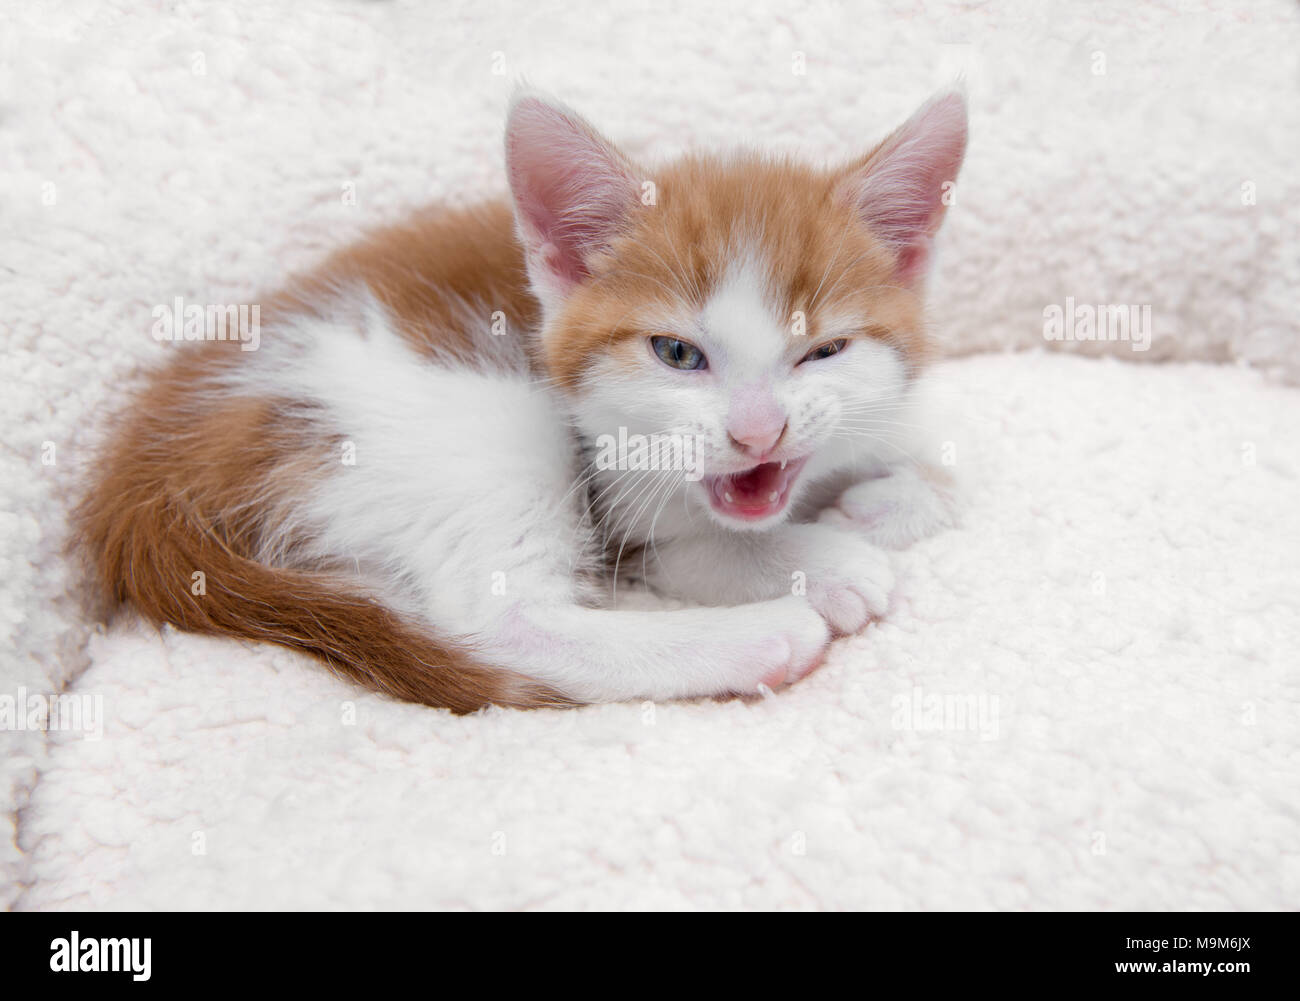 Angry little kitten snarling in a furry basket Stock Photo